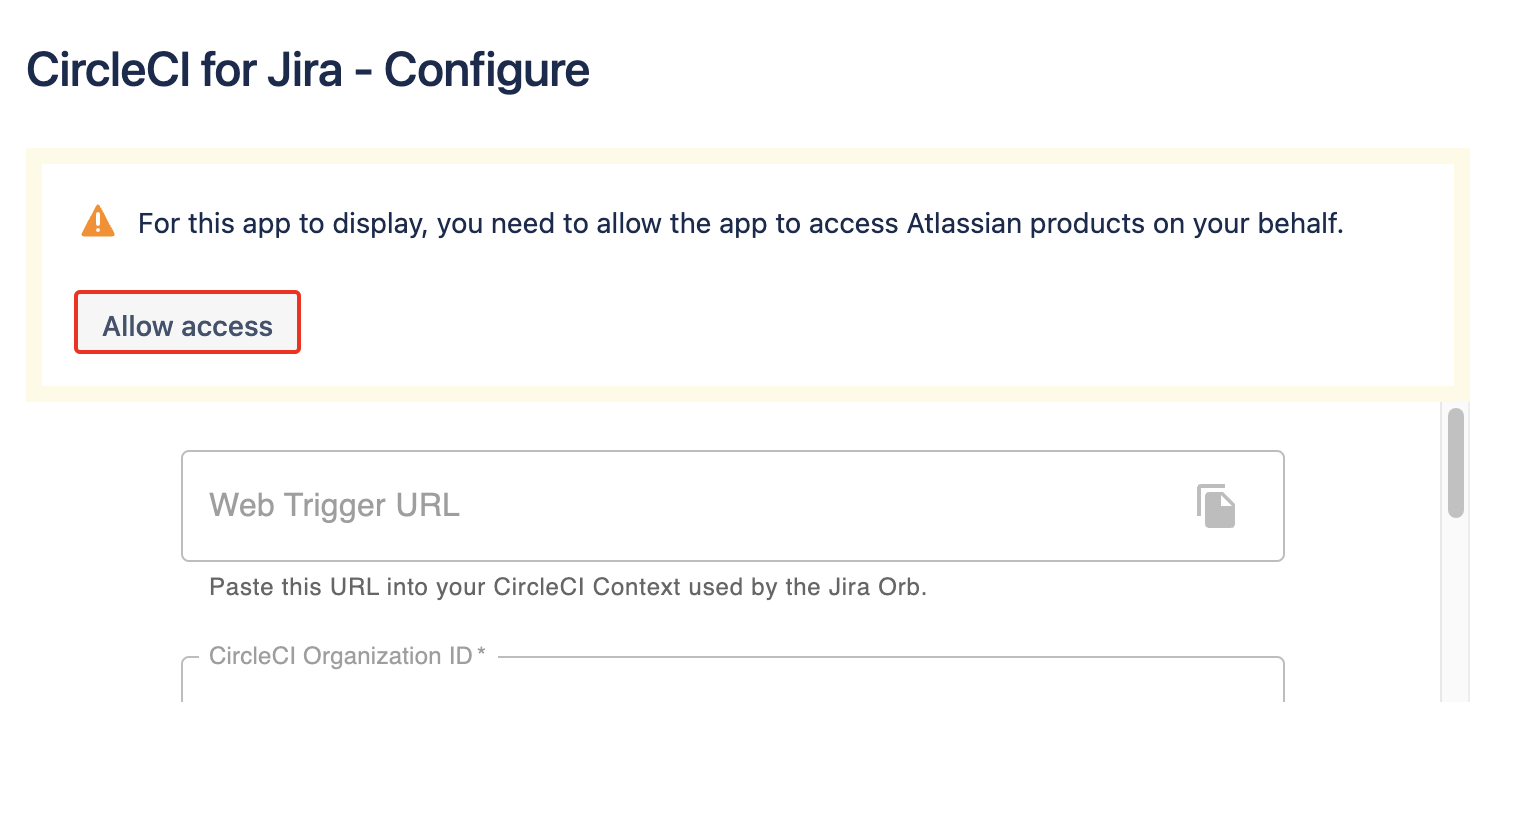 Allow the app access to Atlassian on your behalf